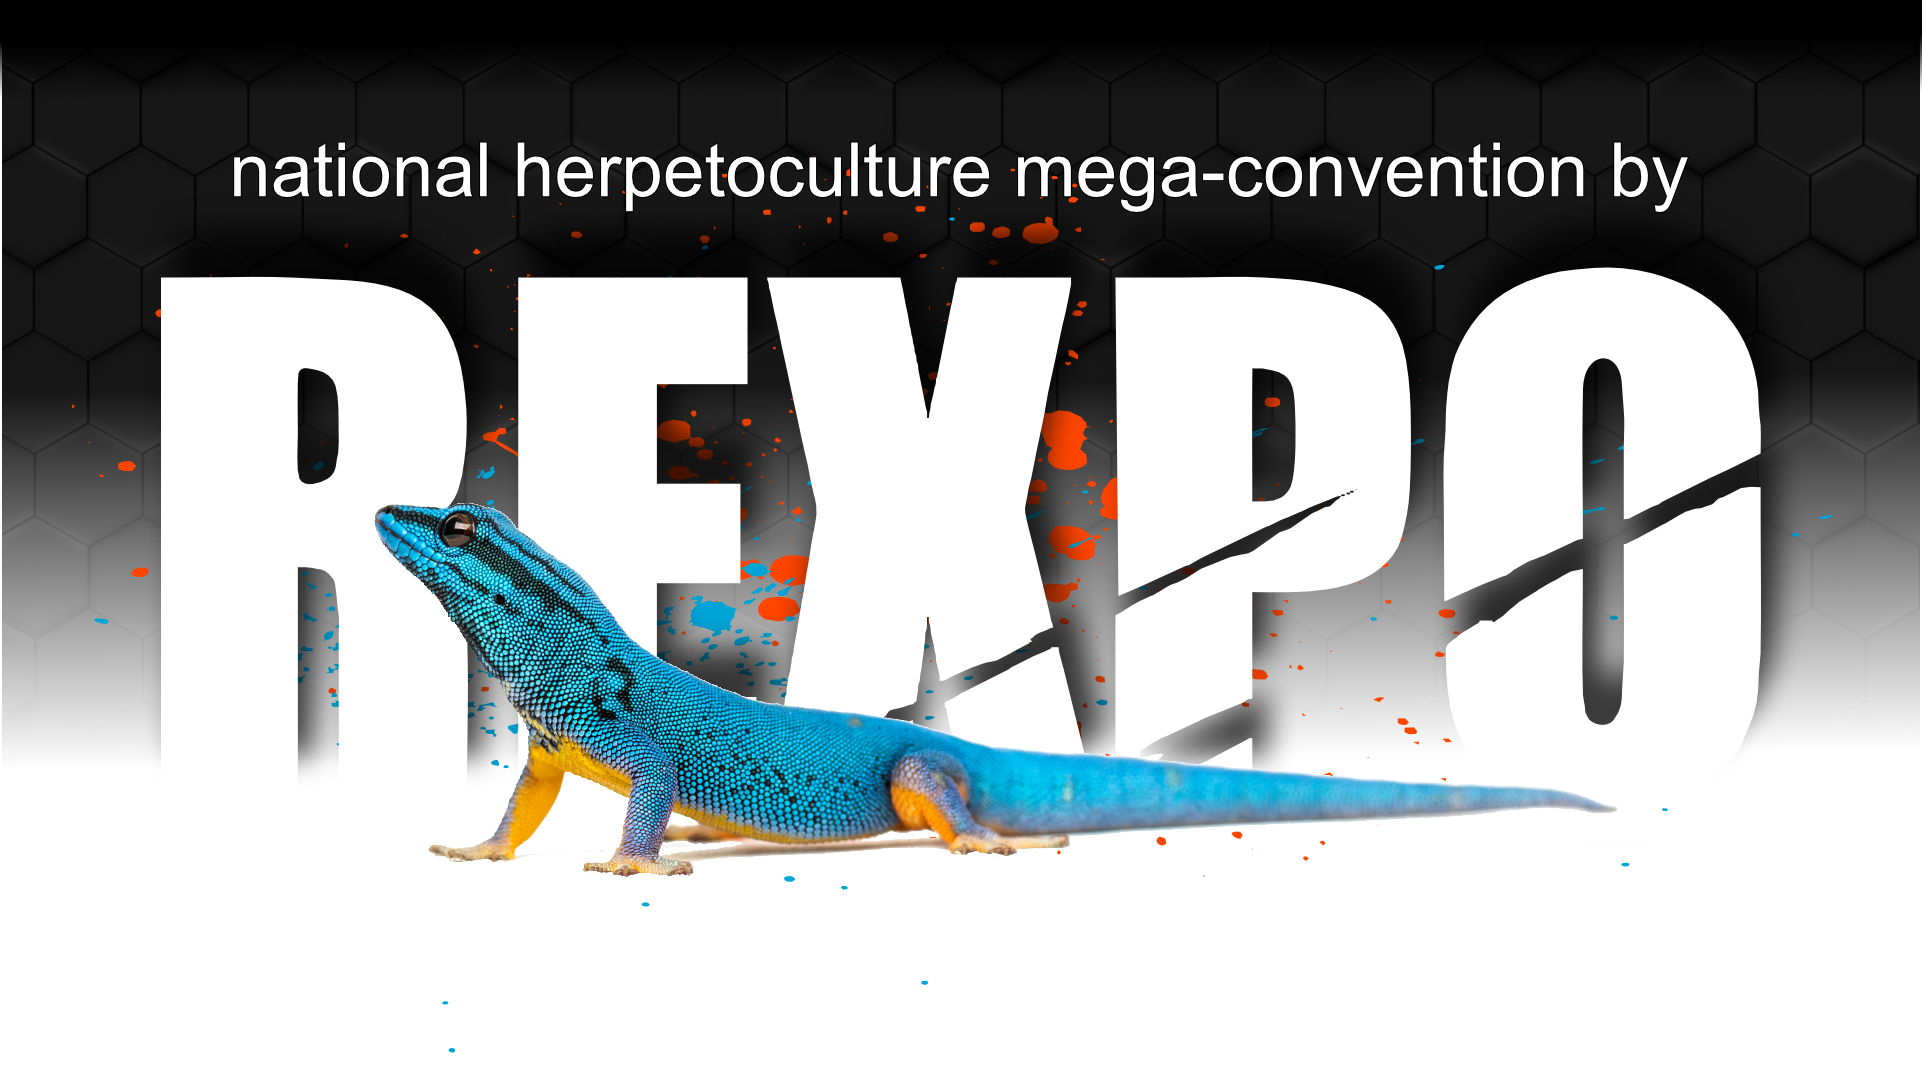 MegaConvention "2024" REXPO East Coast Reptile Conventions